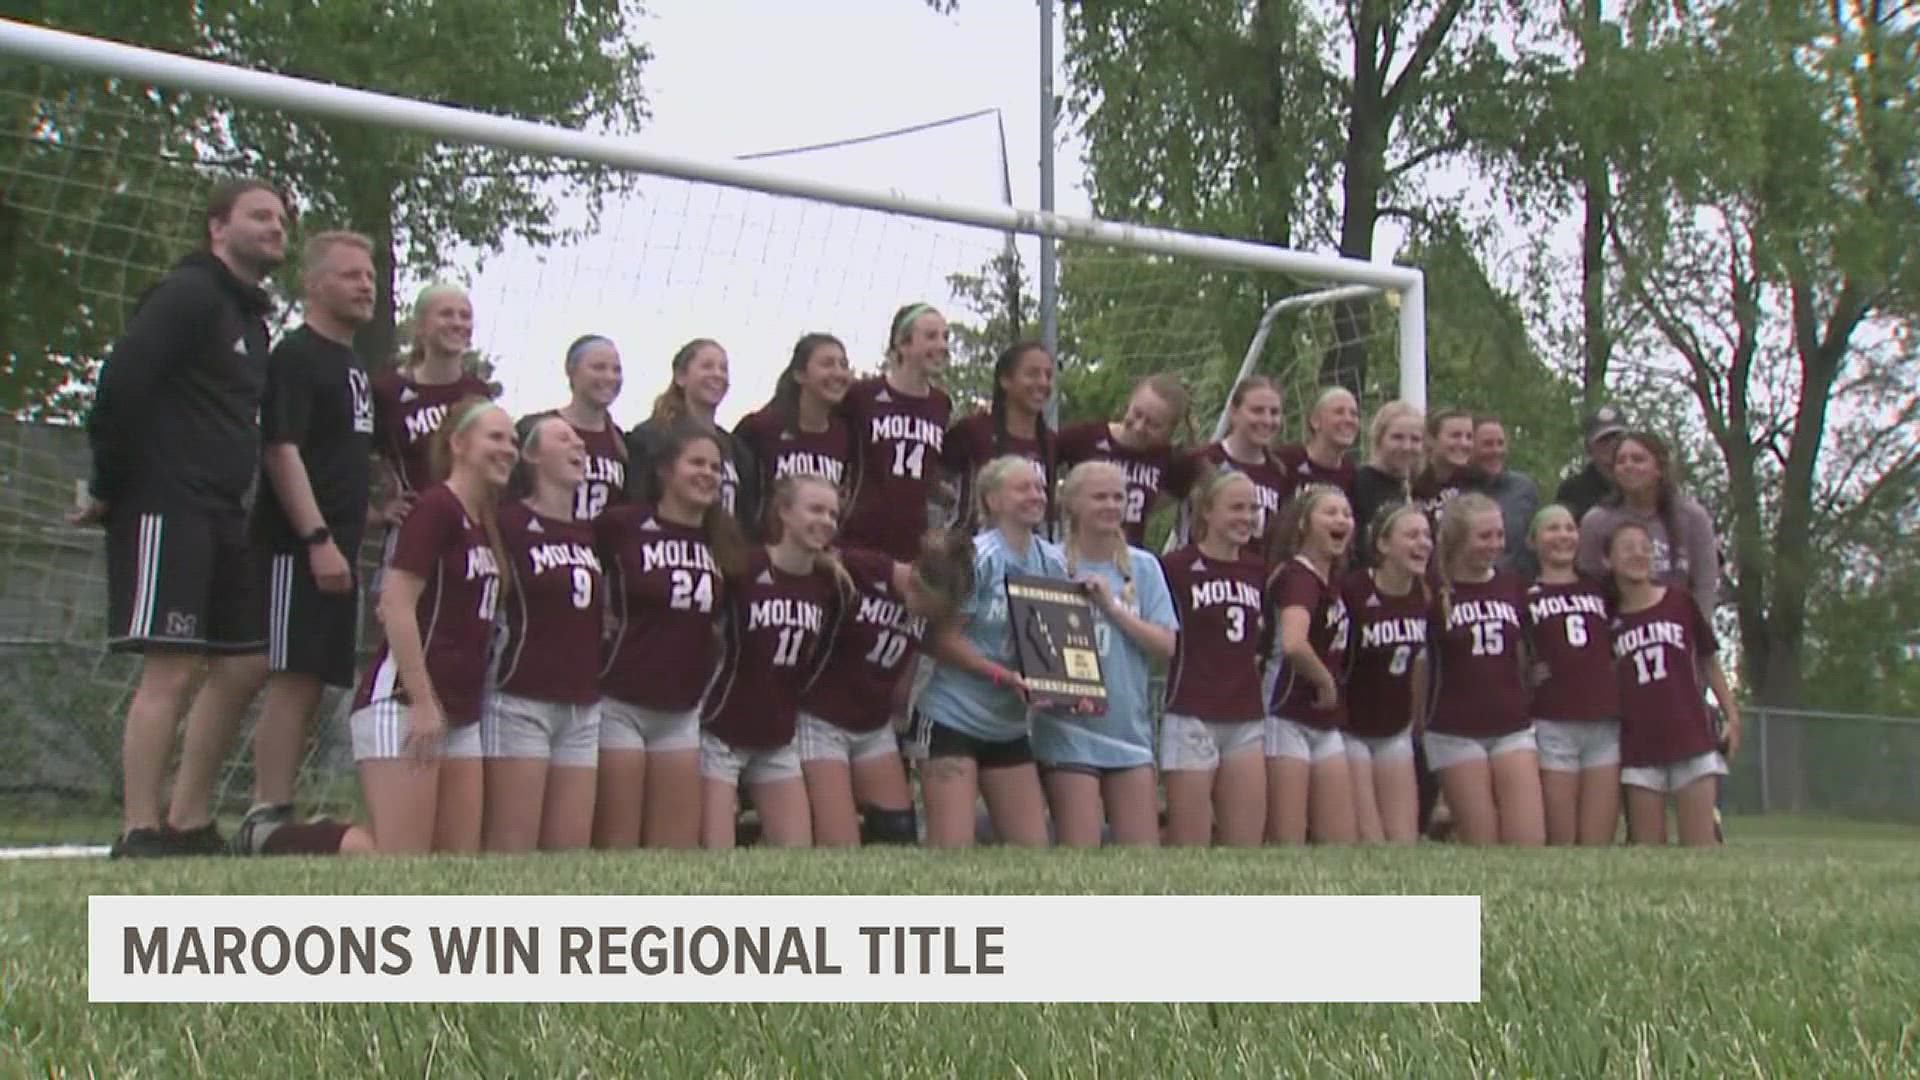 The Maroons hung on to win their first 3A Regional Title in eight years following another shutout win on Friday.